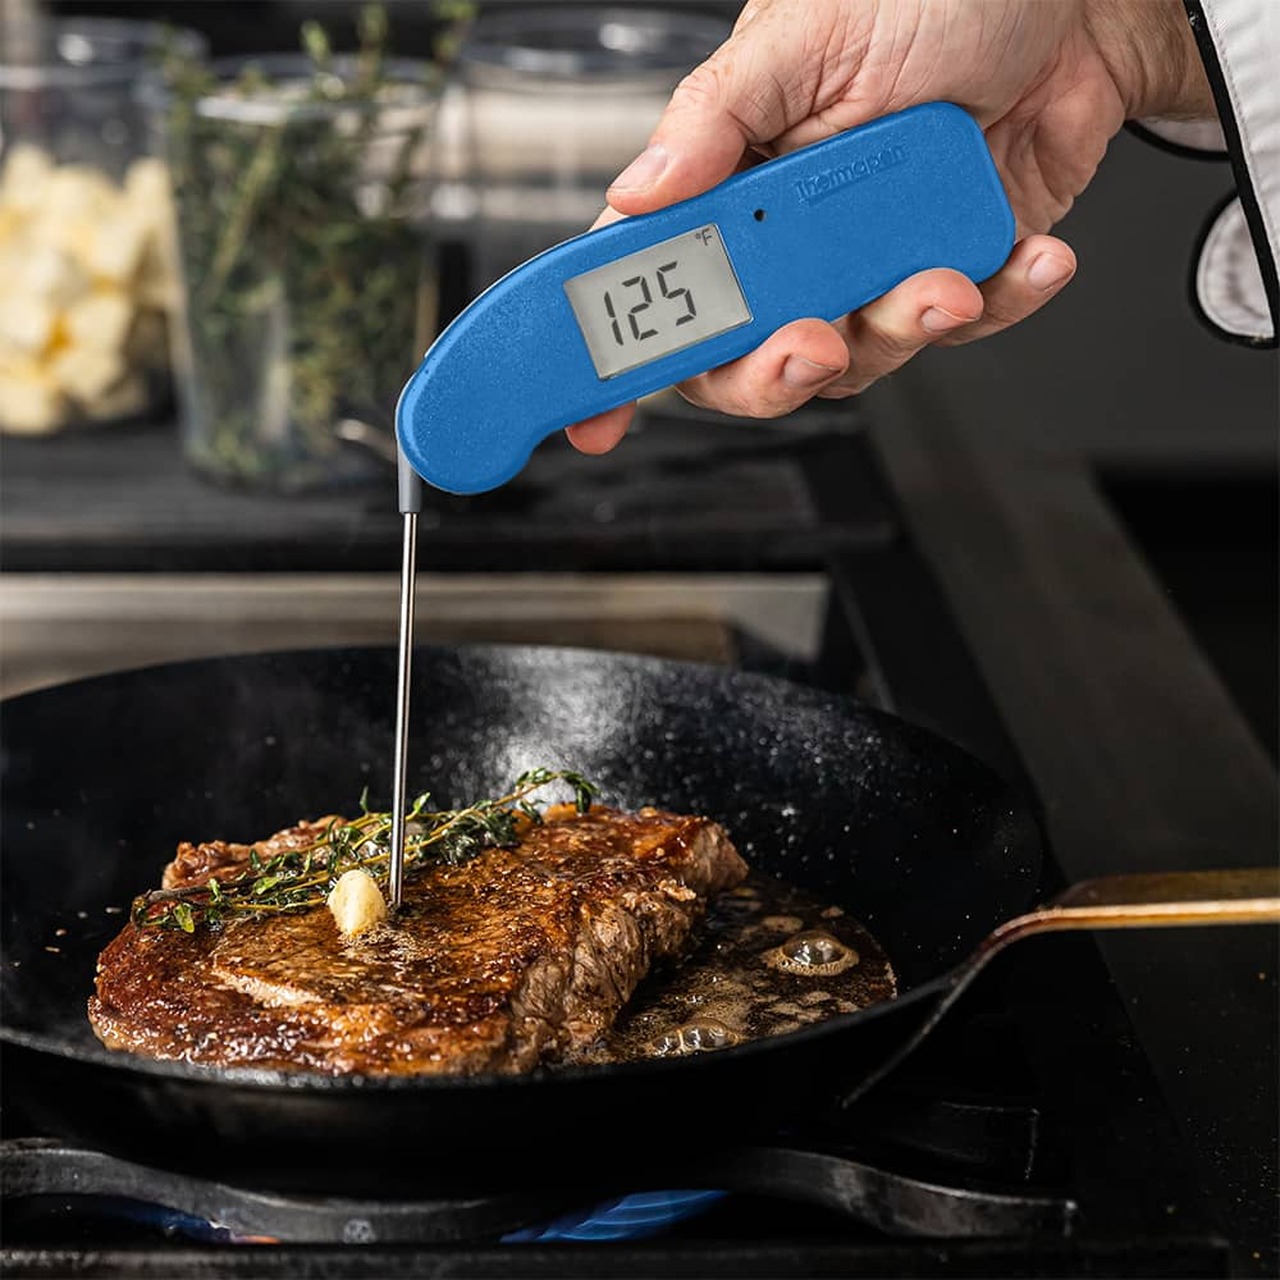 Best Meat Thermometer: ThermoWorks Thermapen MK4 Sale